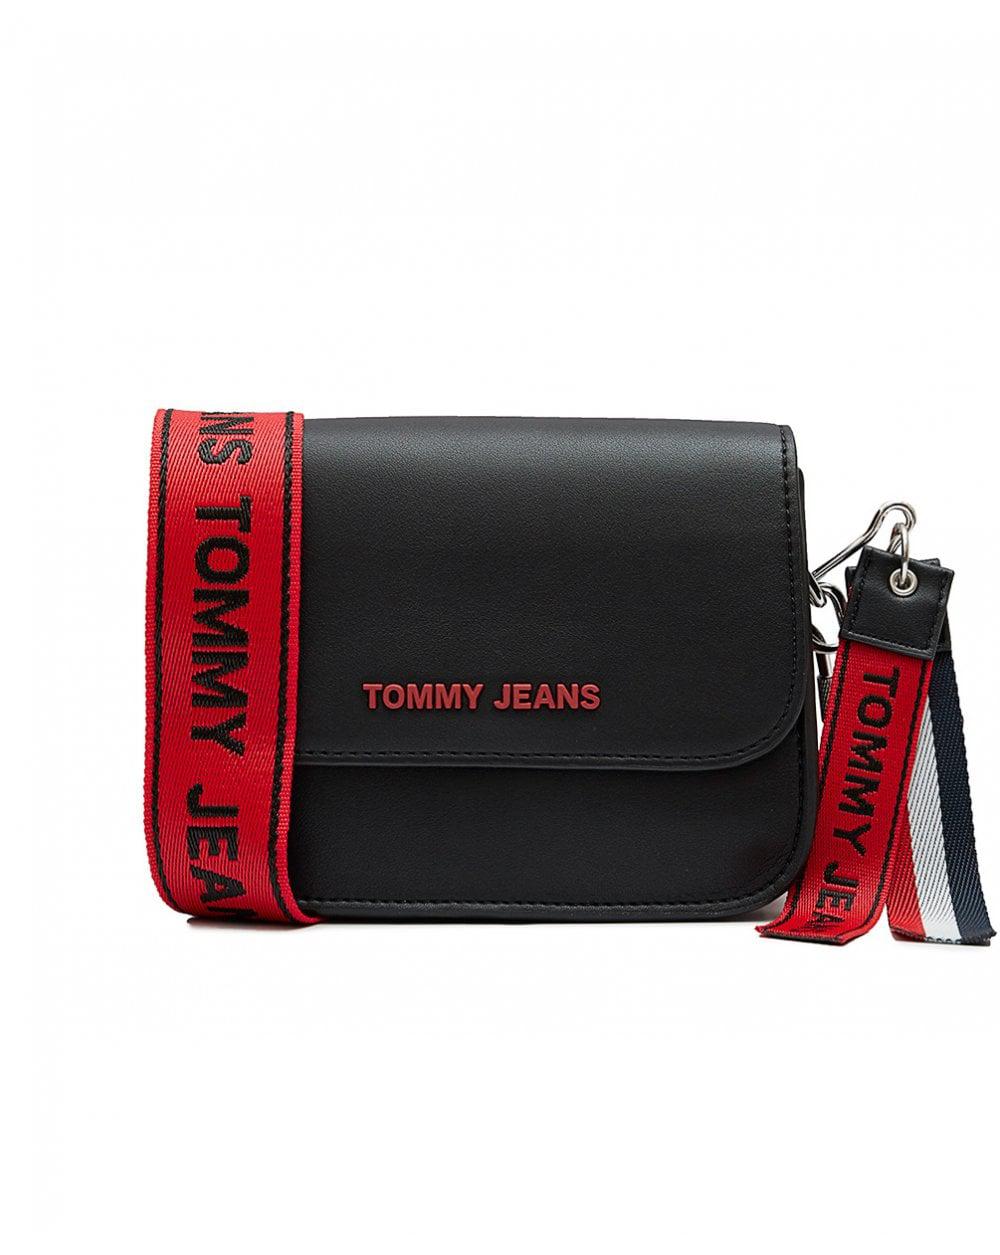 Buy Tommy Hilfiger Crossover Bag | UP TO 55% OFF